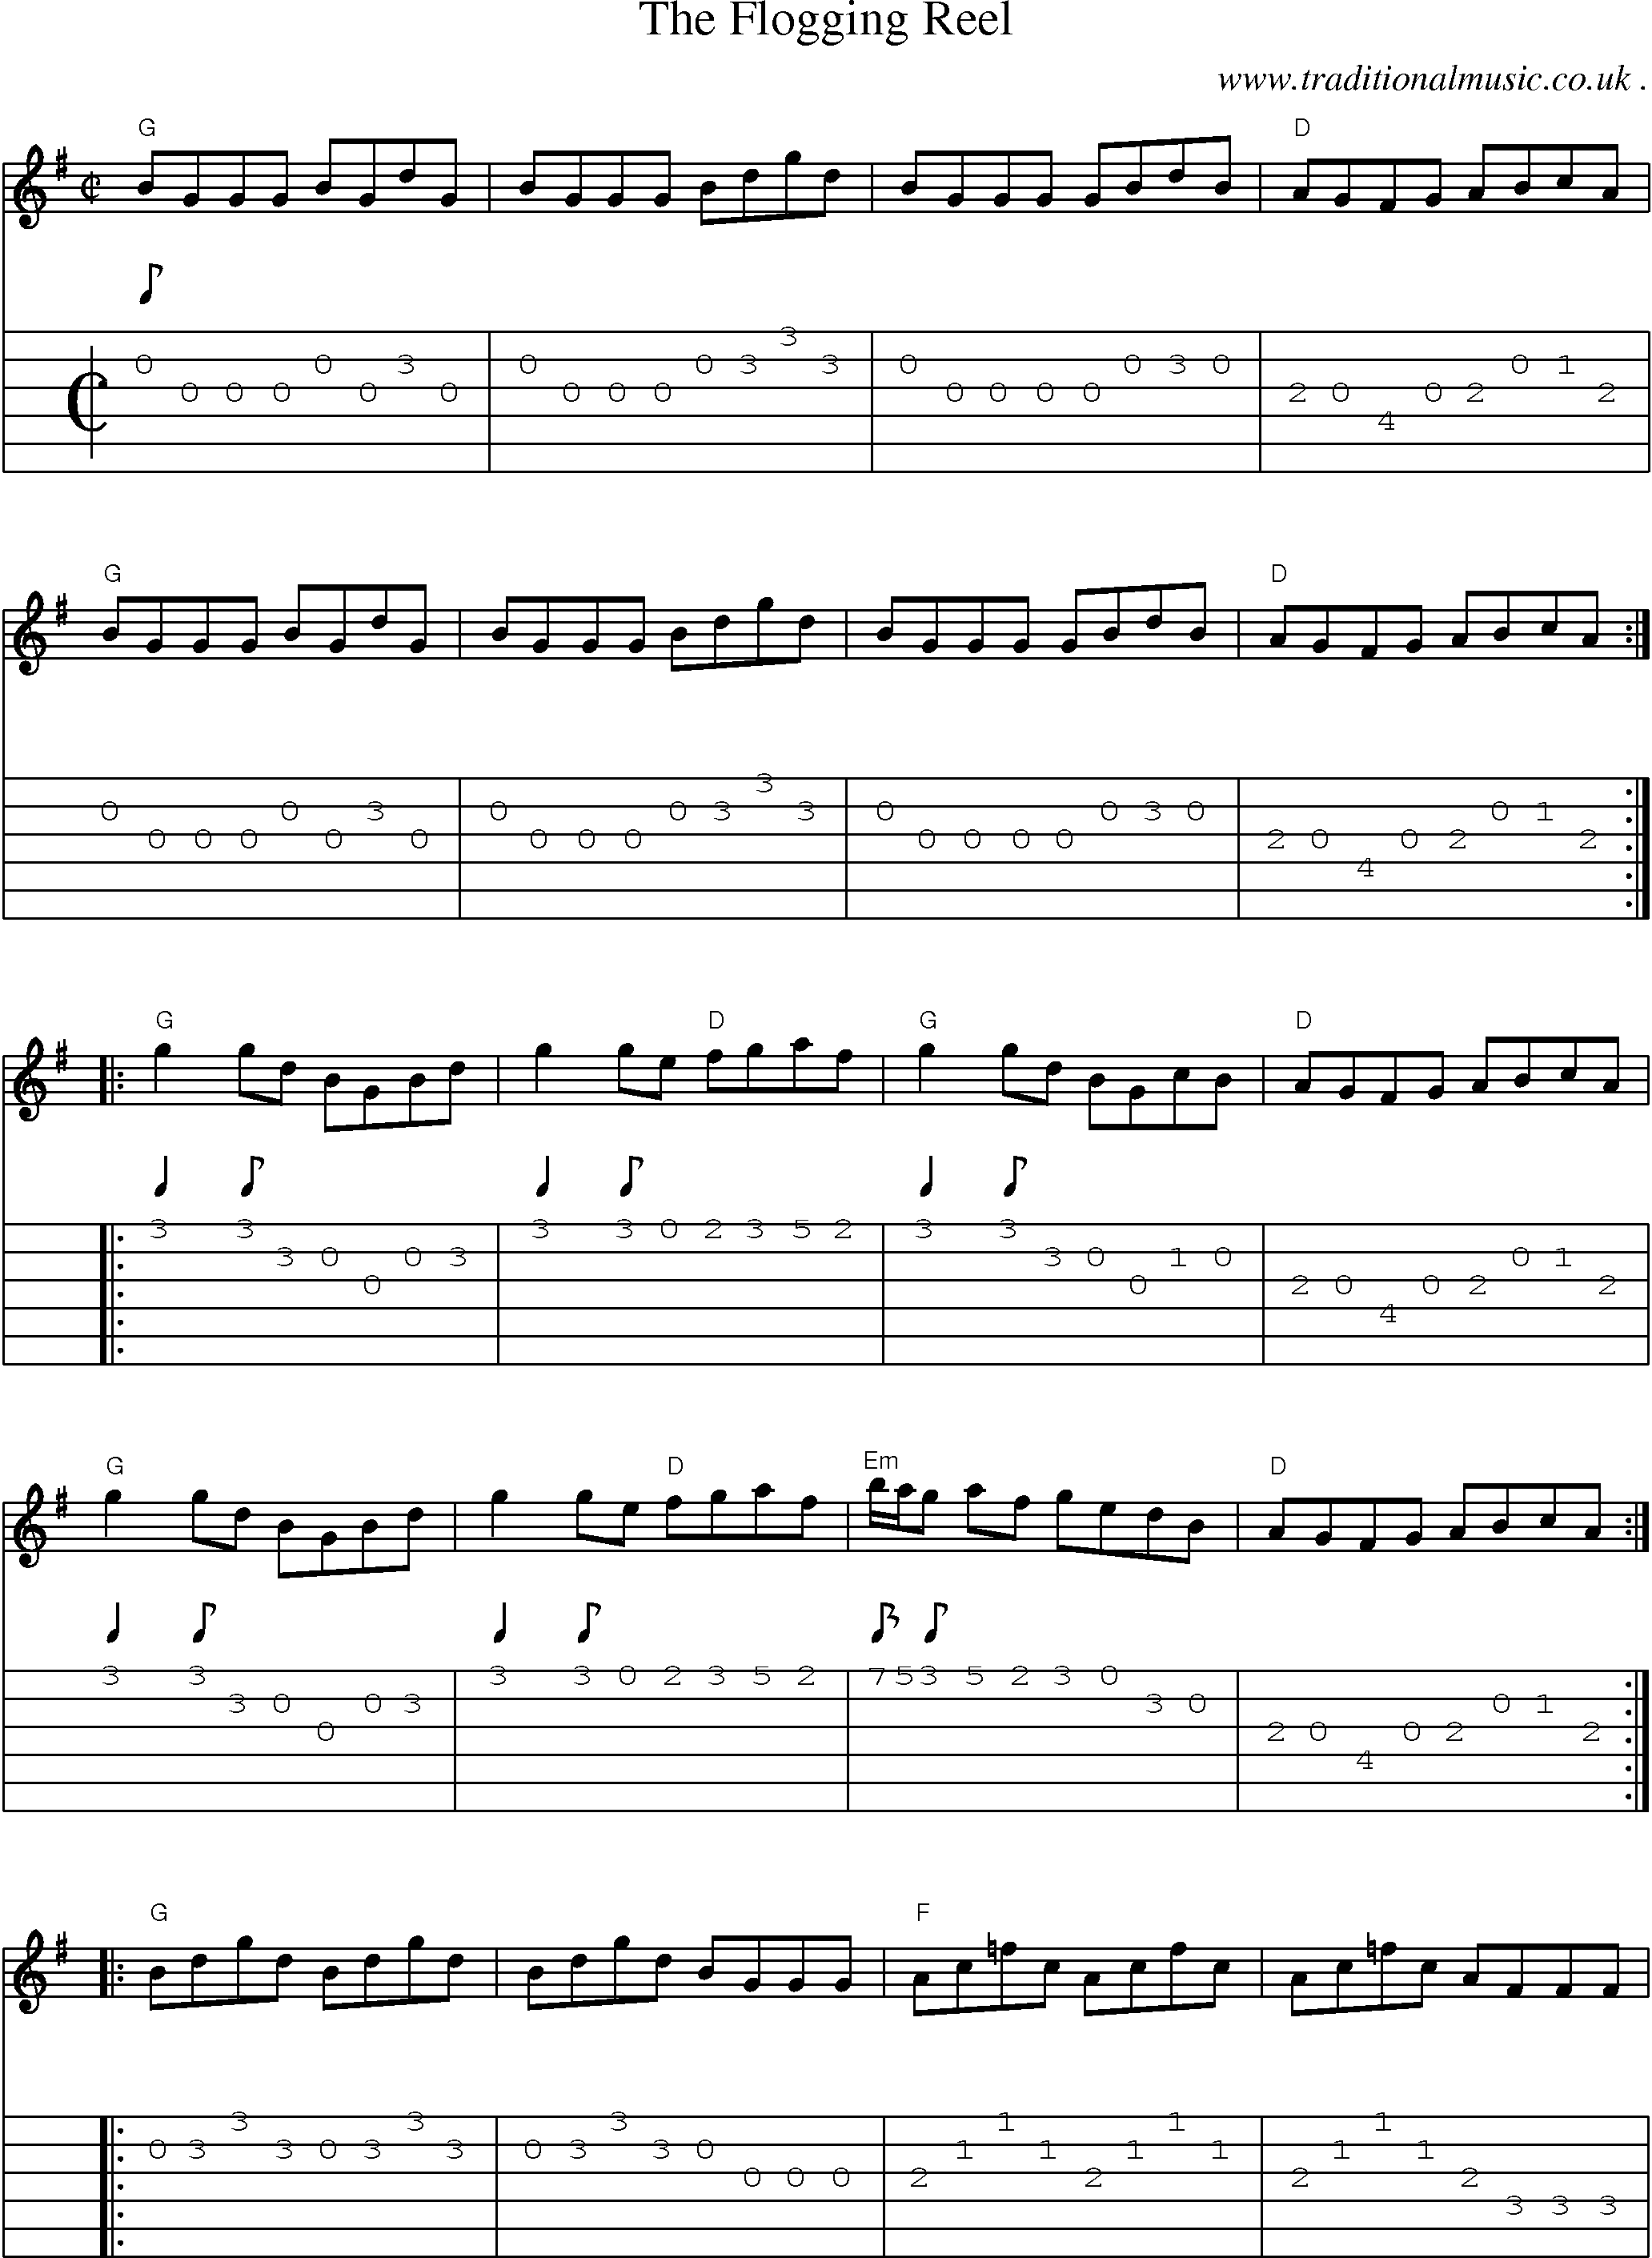 Music Score and Guitar Tabs for The Flogging Reel